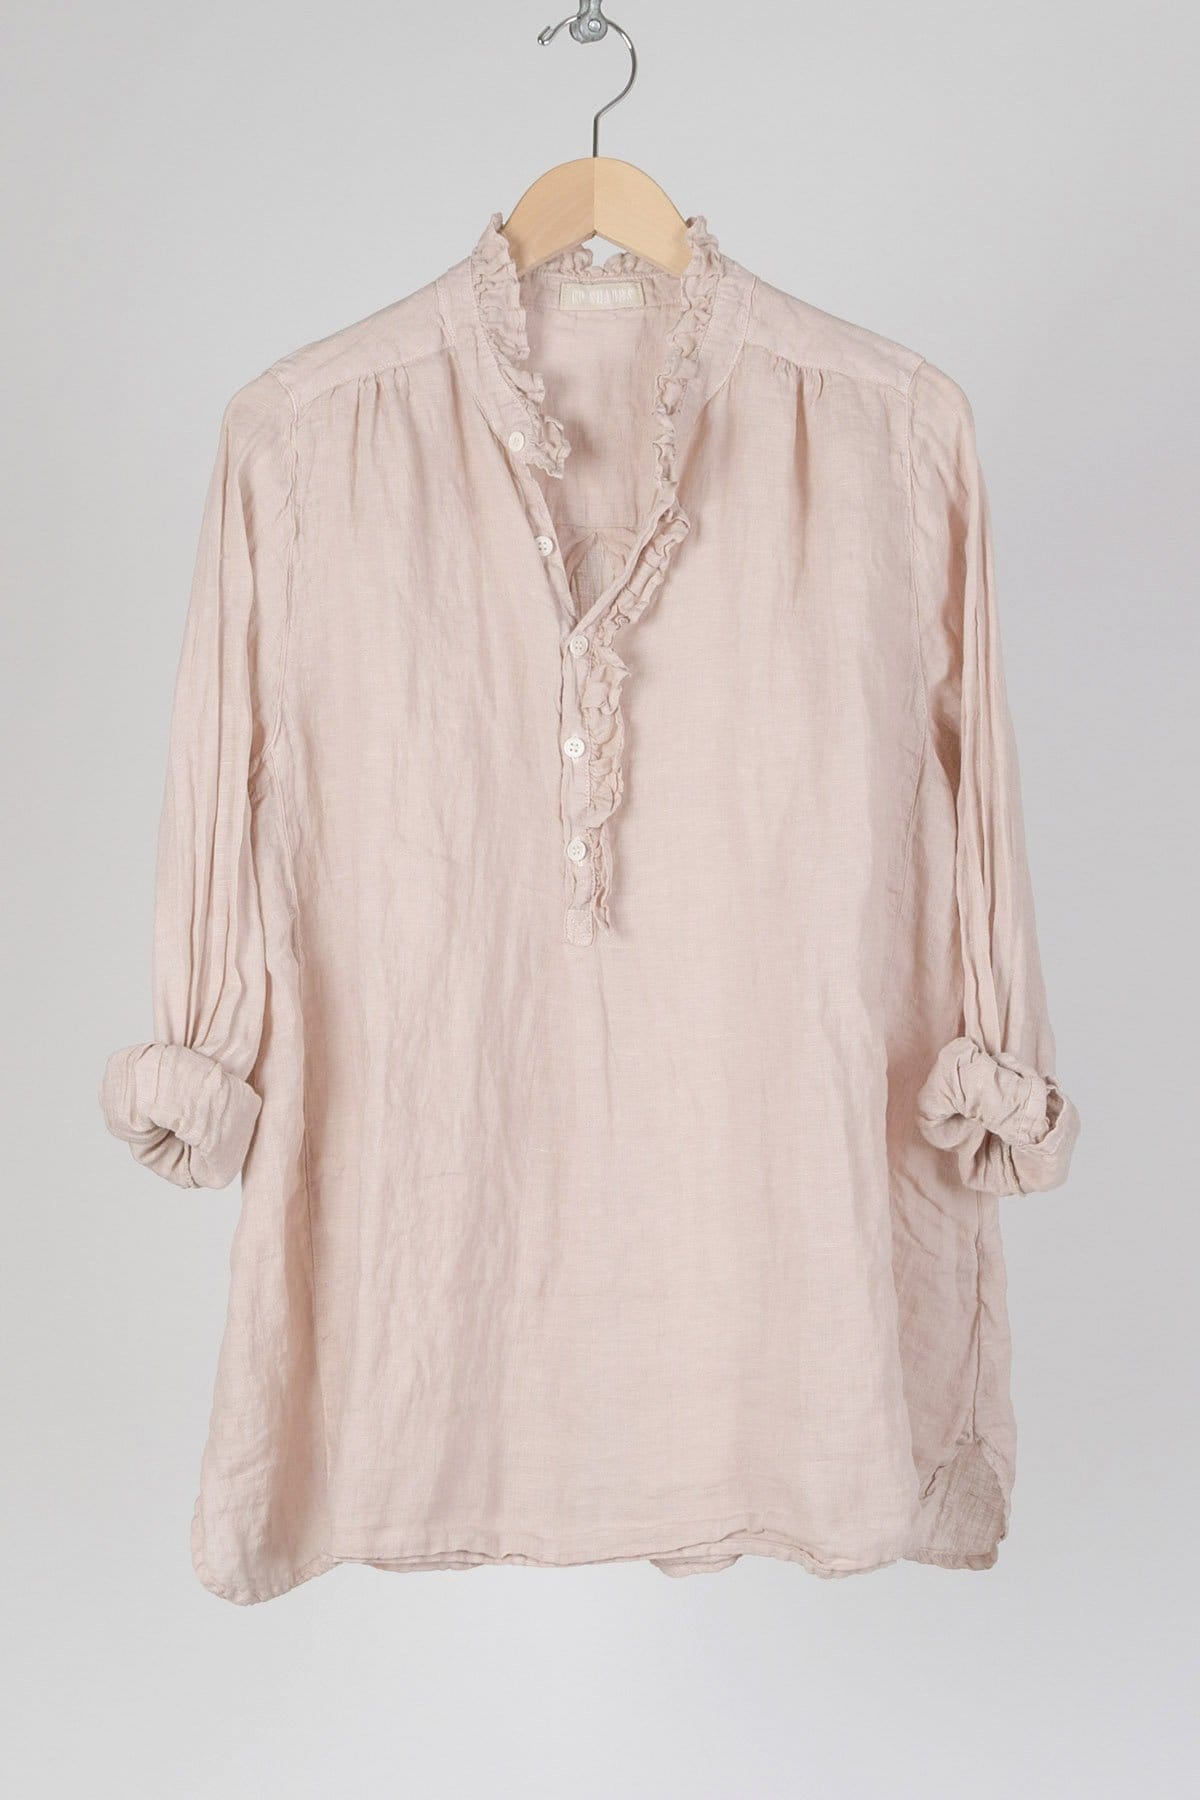 linen shirt with ruffles on collar and cuffs in sand color